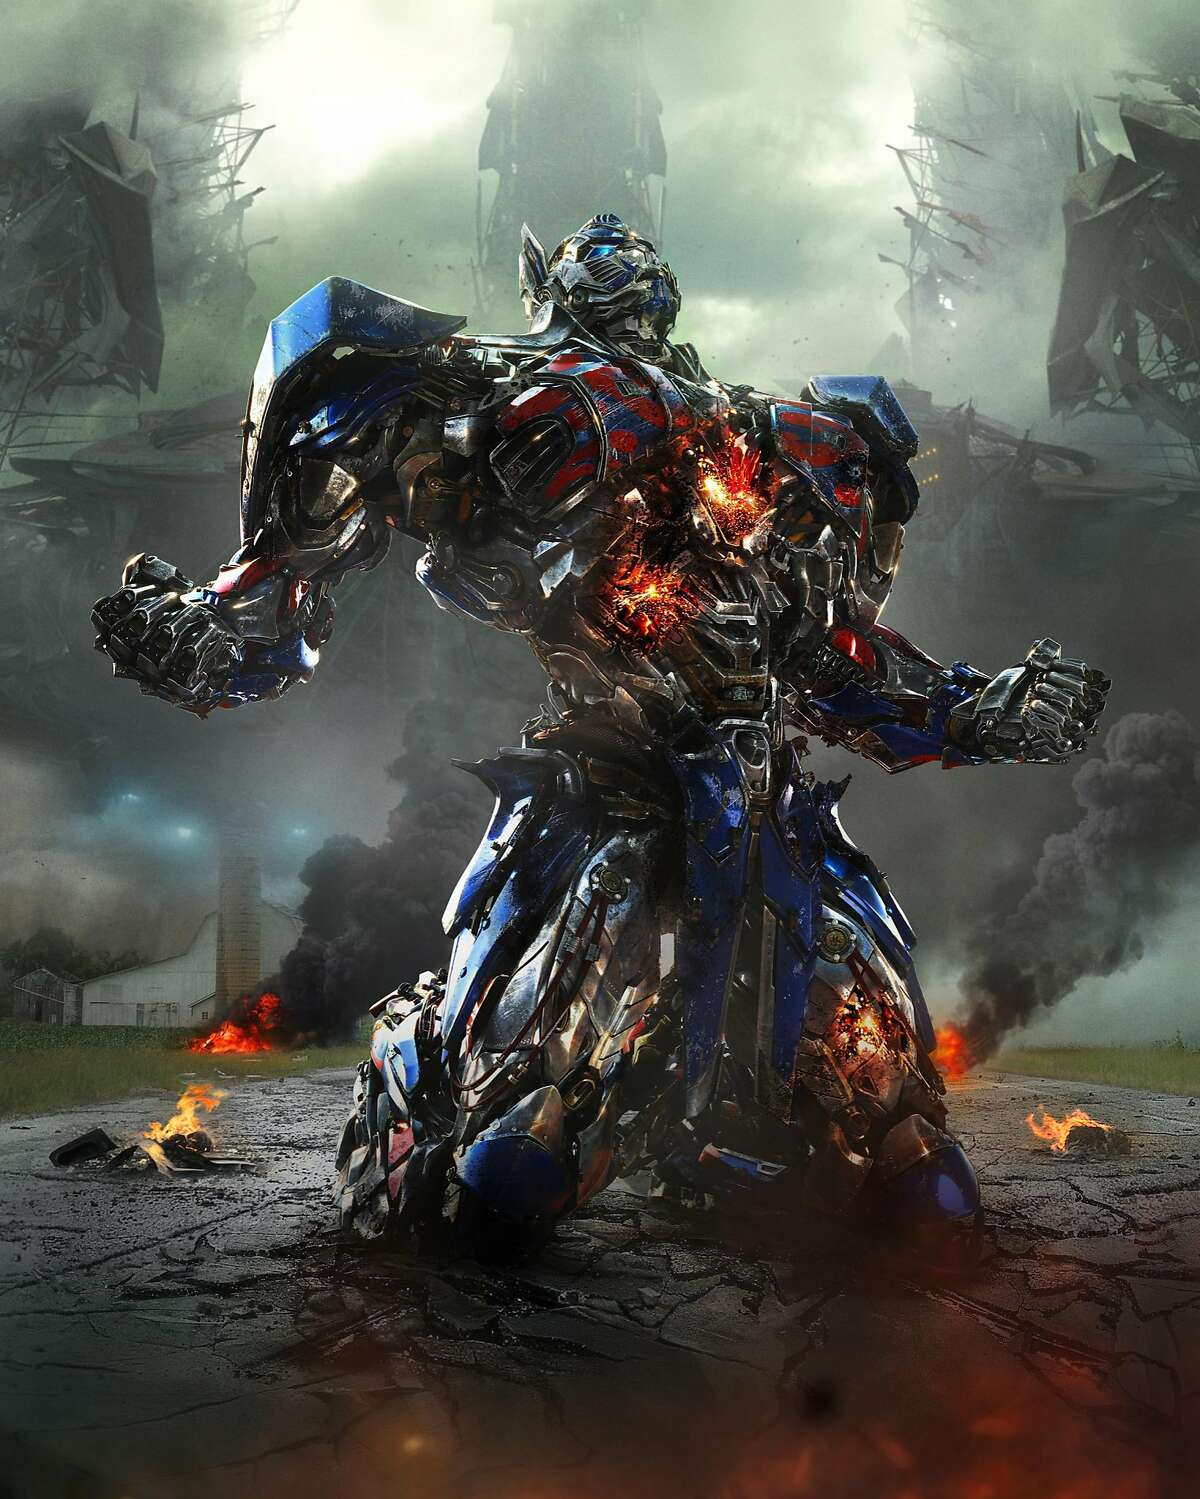 Optimus Prime in TRANSFORMERS: AGE OF EXTINCTION, in theaters 6/27/14.